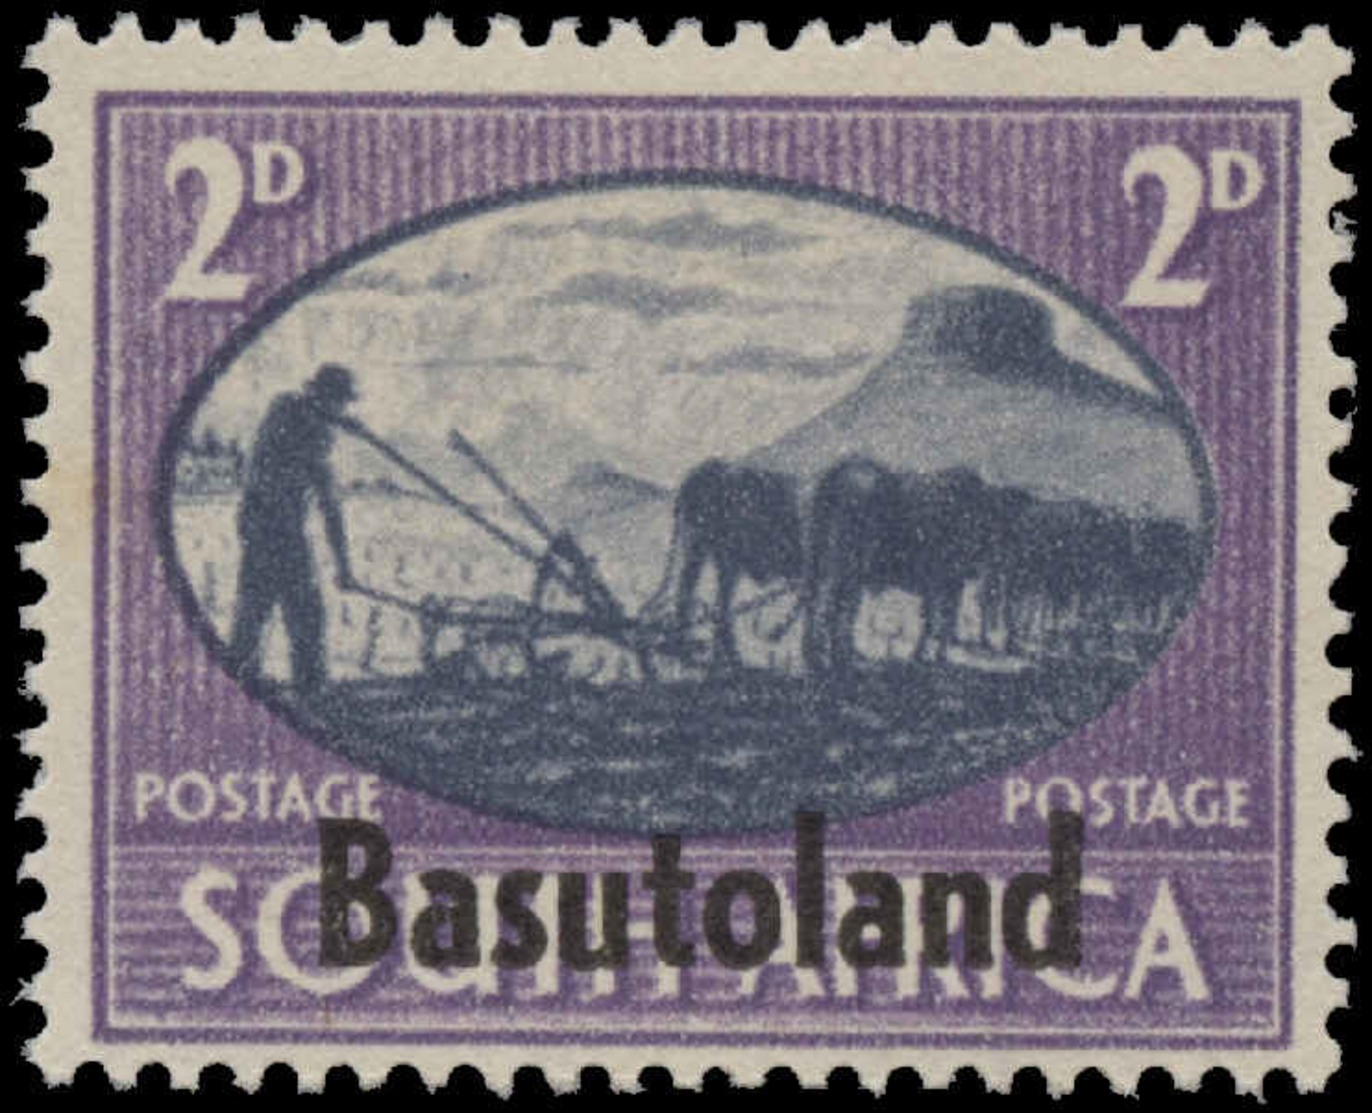 Basutoland Scott # 30b, 2p Violet & Slate (1945) South Africia Stamp Overprinted, Mint Hinged - 1933-1964 Crown Colony